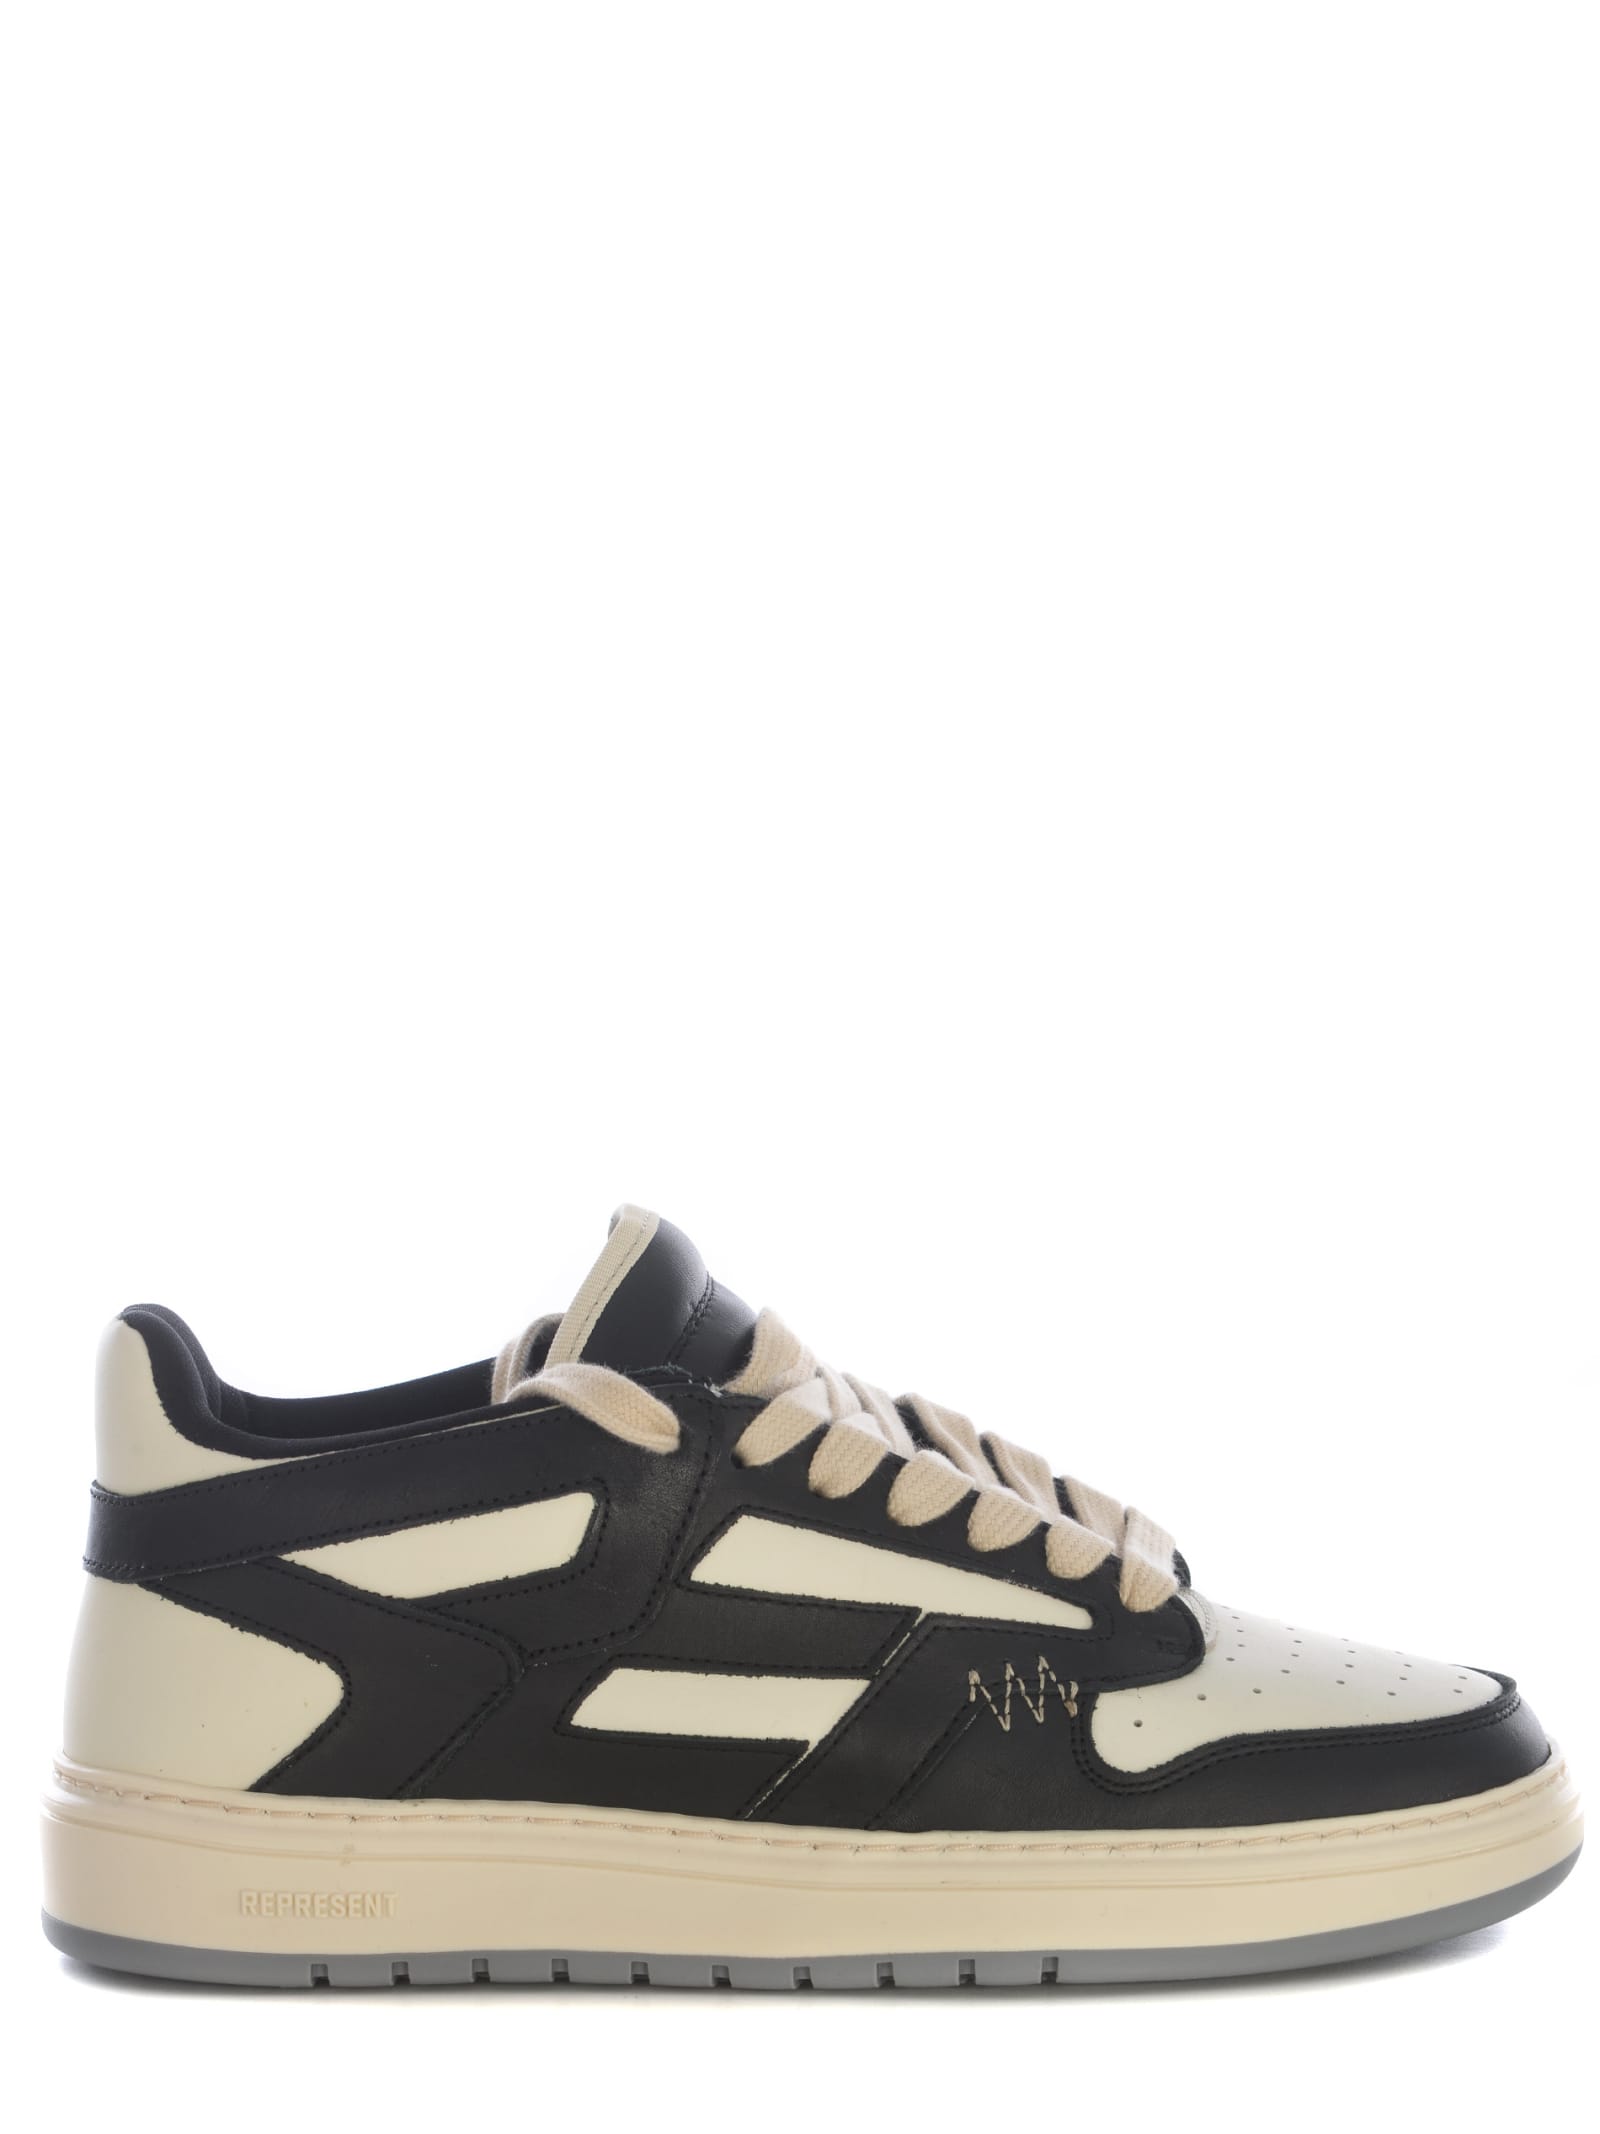 Shop Represent Sneakers  Made Of Leather In Beige